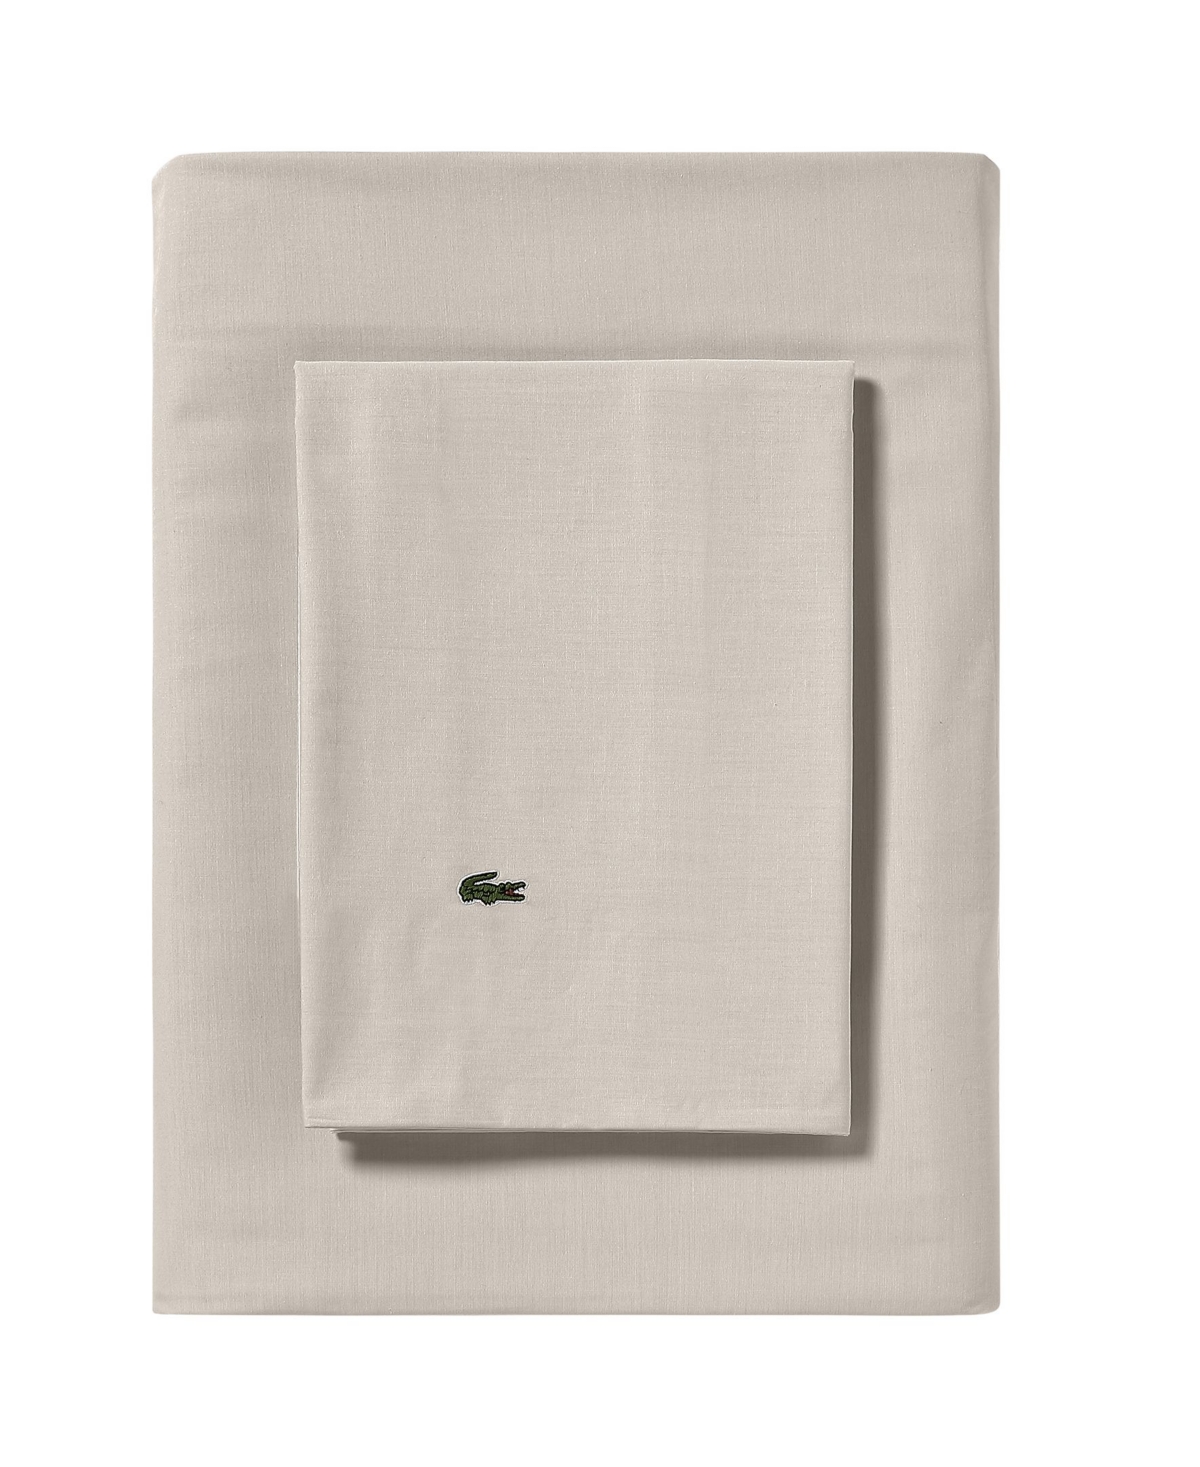 Lacoste Home Solid Cotton Percale Sheet Set, Twin In Pumice